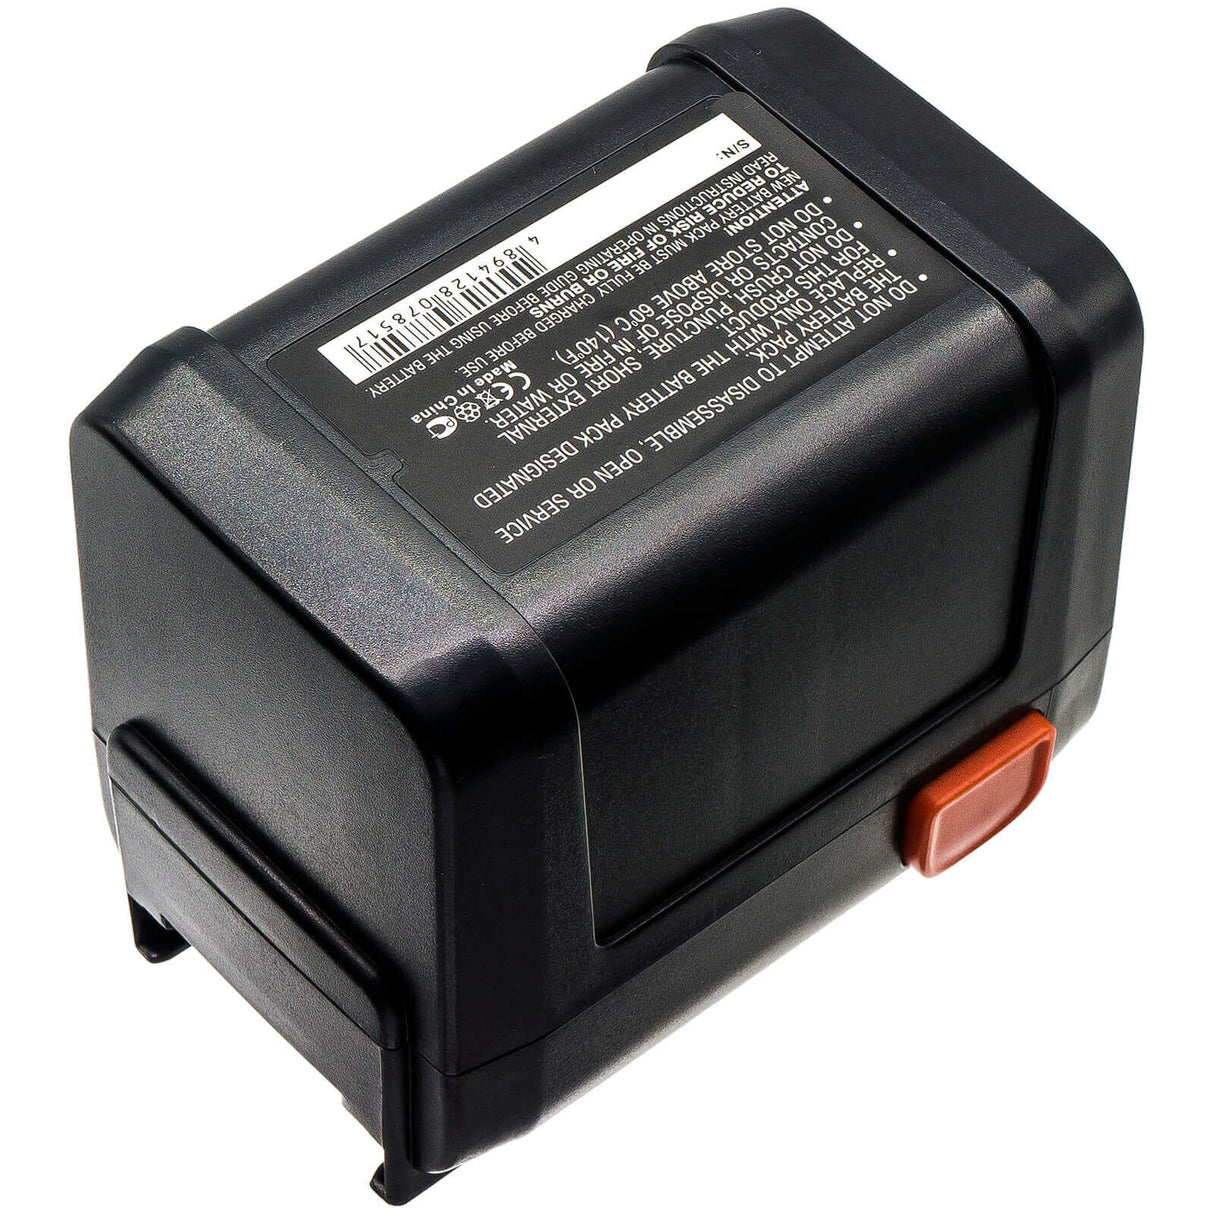 Battery For Gardena 8841, 8840, Accucut Li 400 18.0v, 3000mah - 54.00wh Batteries for Electronics Cameron Sino Technology Limited   